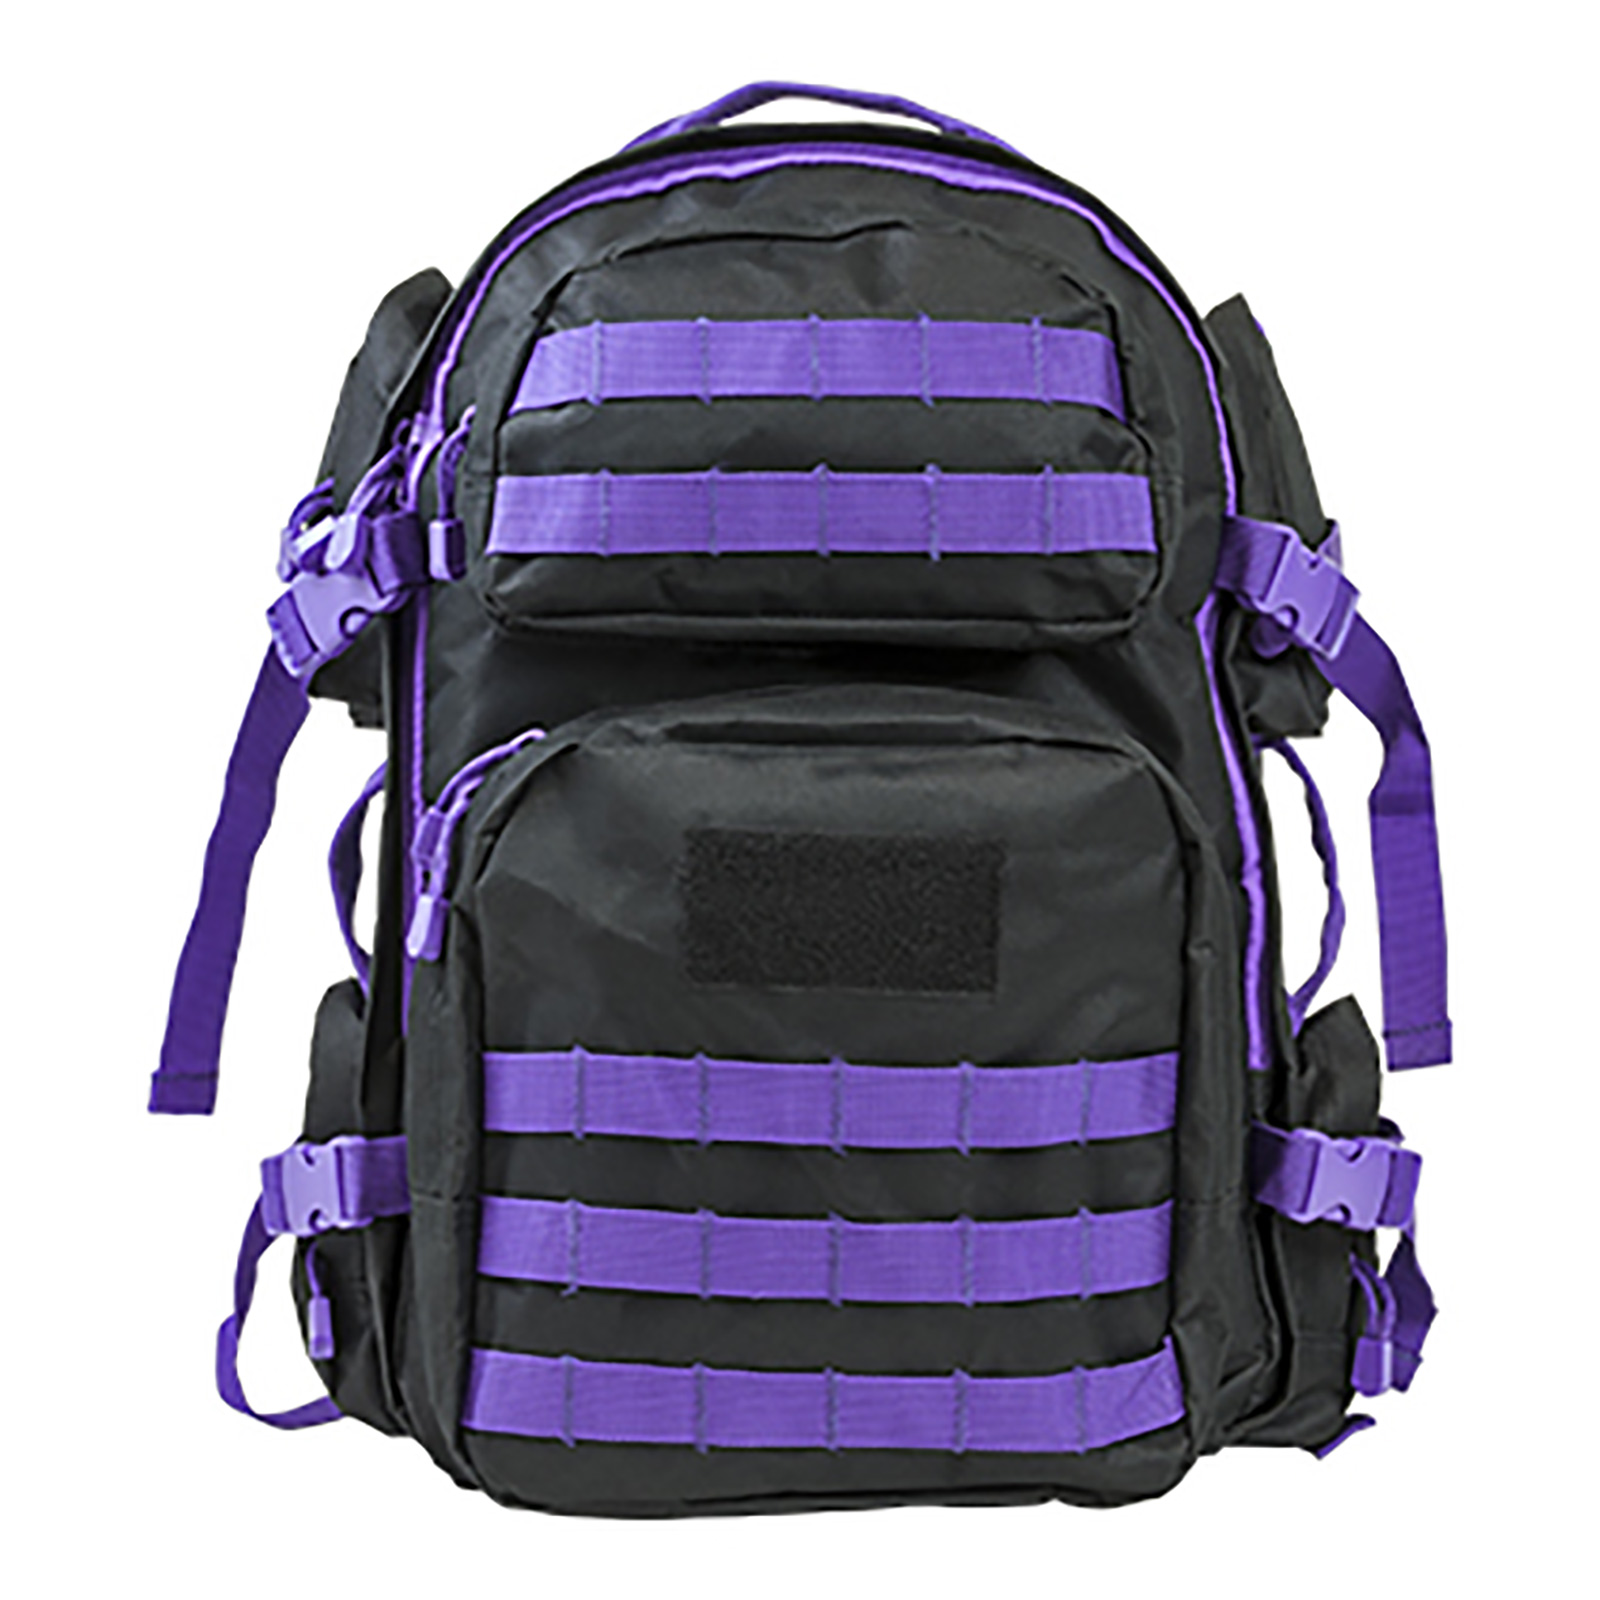 anc-star-vism-tactical-backpack-black-with-purple